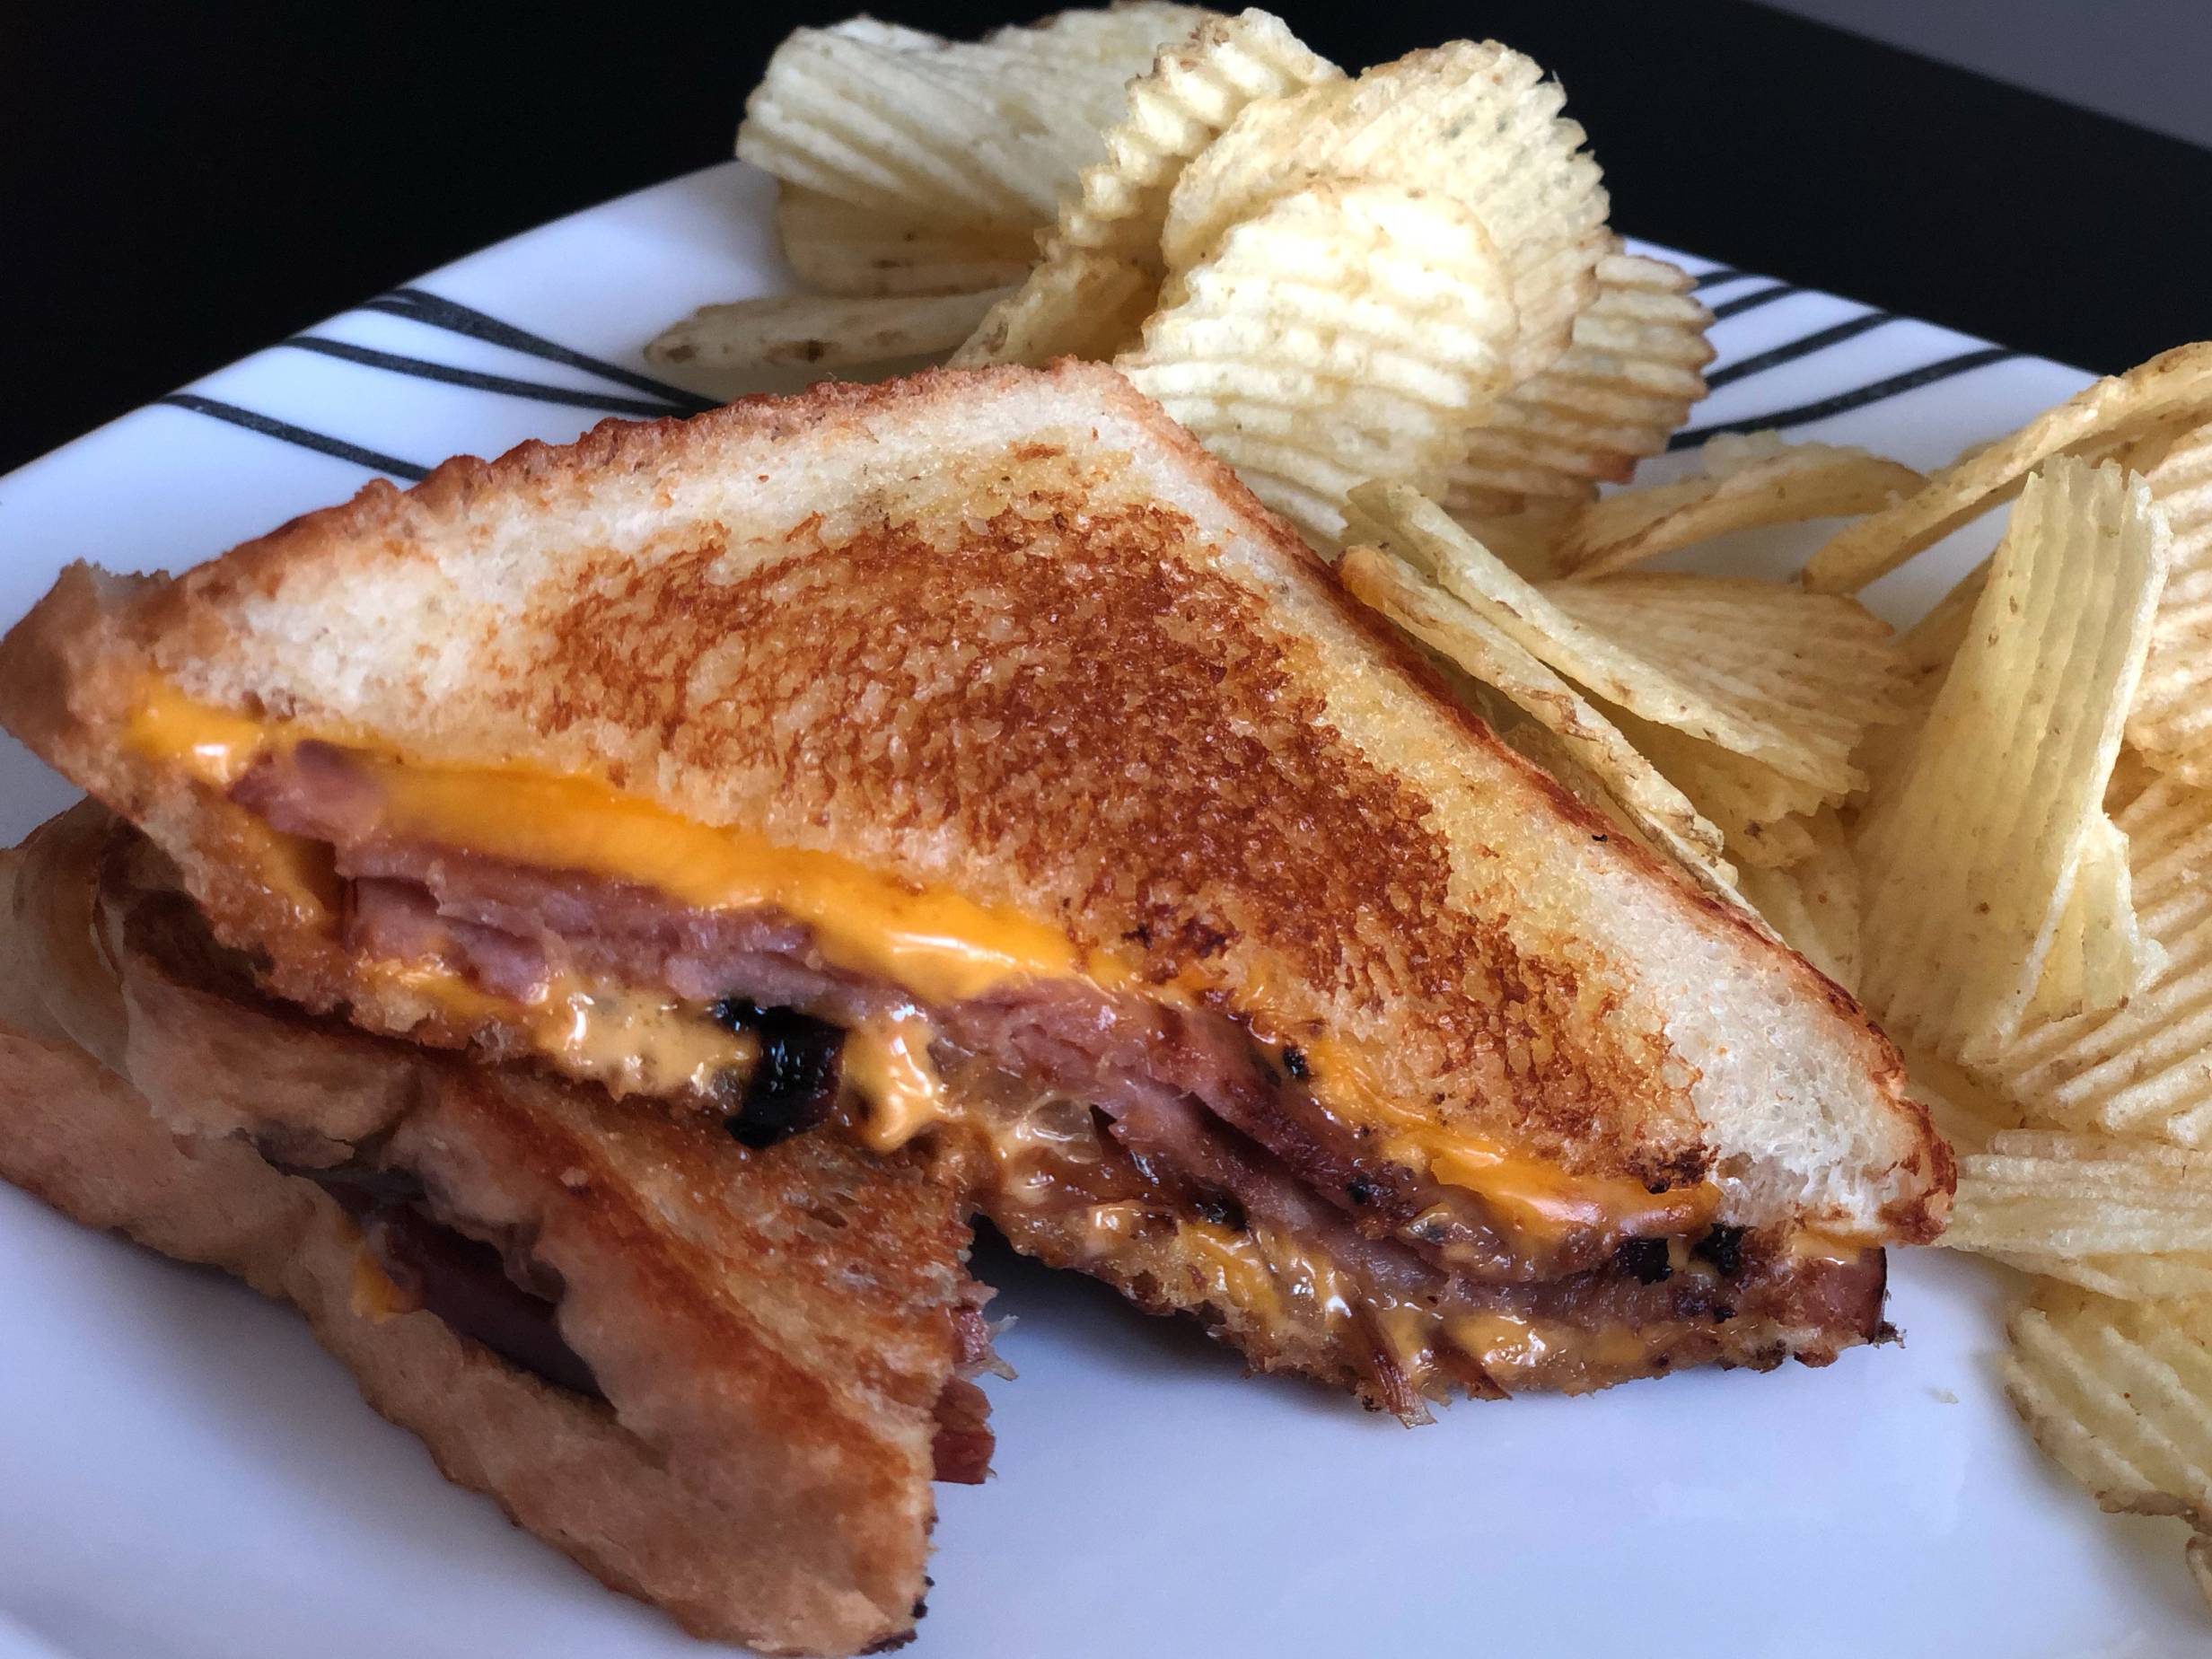 A sliced ham and grilled cheese sandwich from Merry Ann's Diner is on a white plate next to a large portion of ridged chips. Photo by Alyssa Buckley.